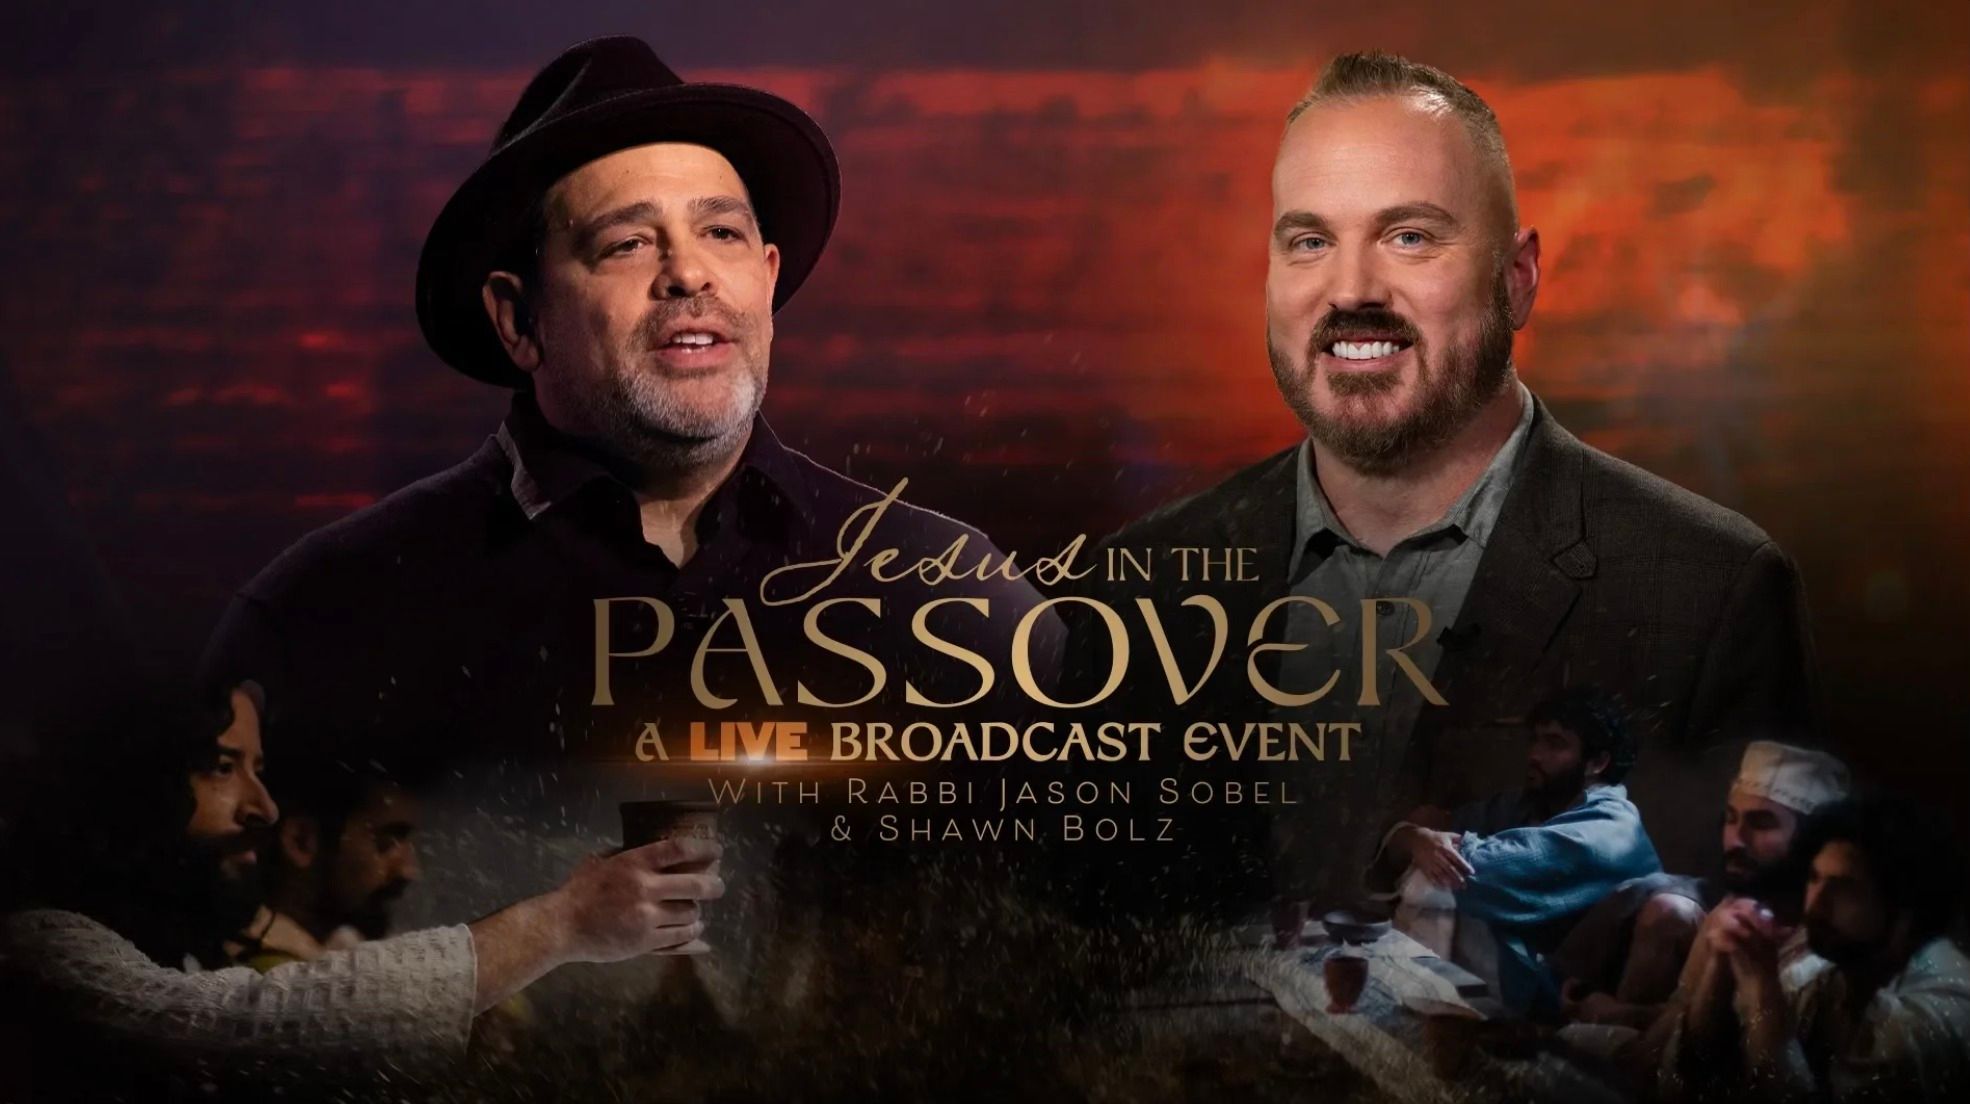 Live TBN Passover with Shawn Bolz, Rabbi Jason Sobel and friends